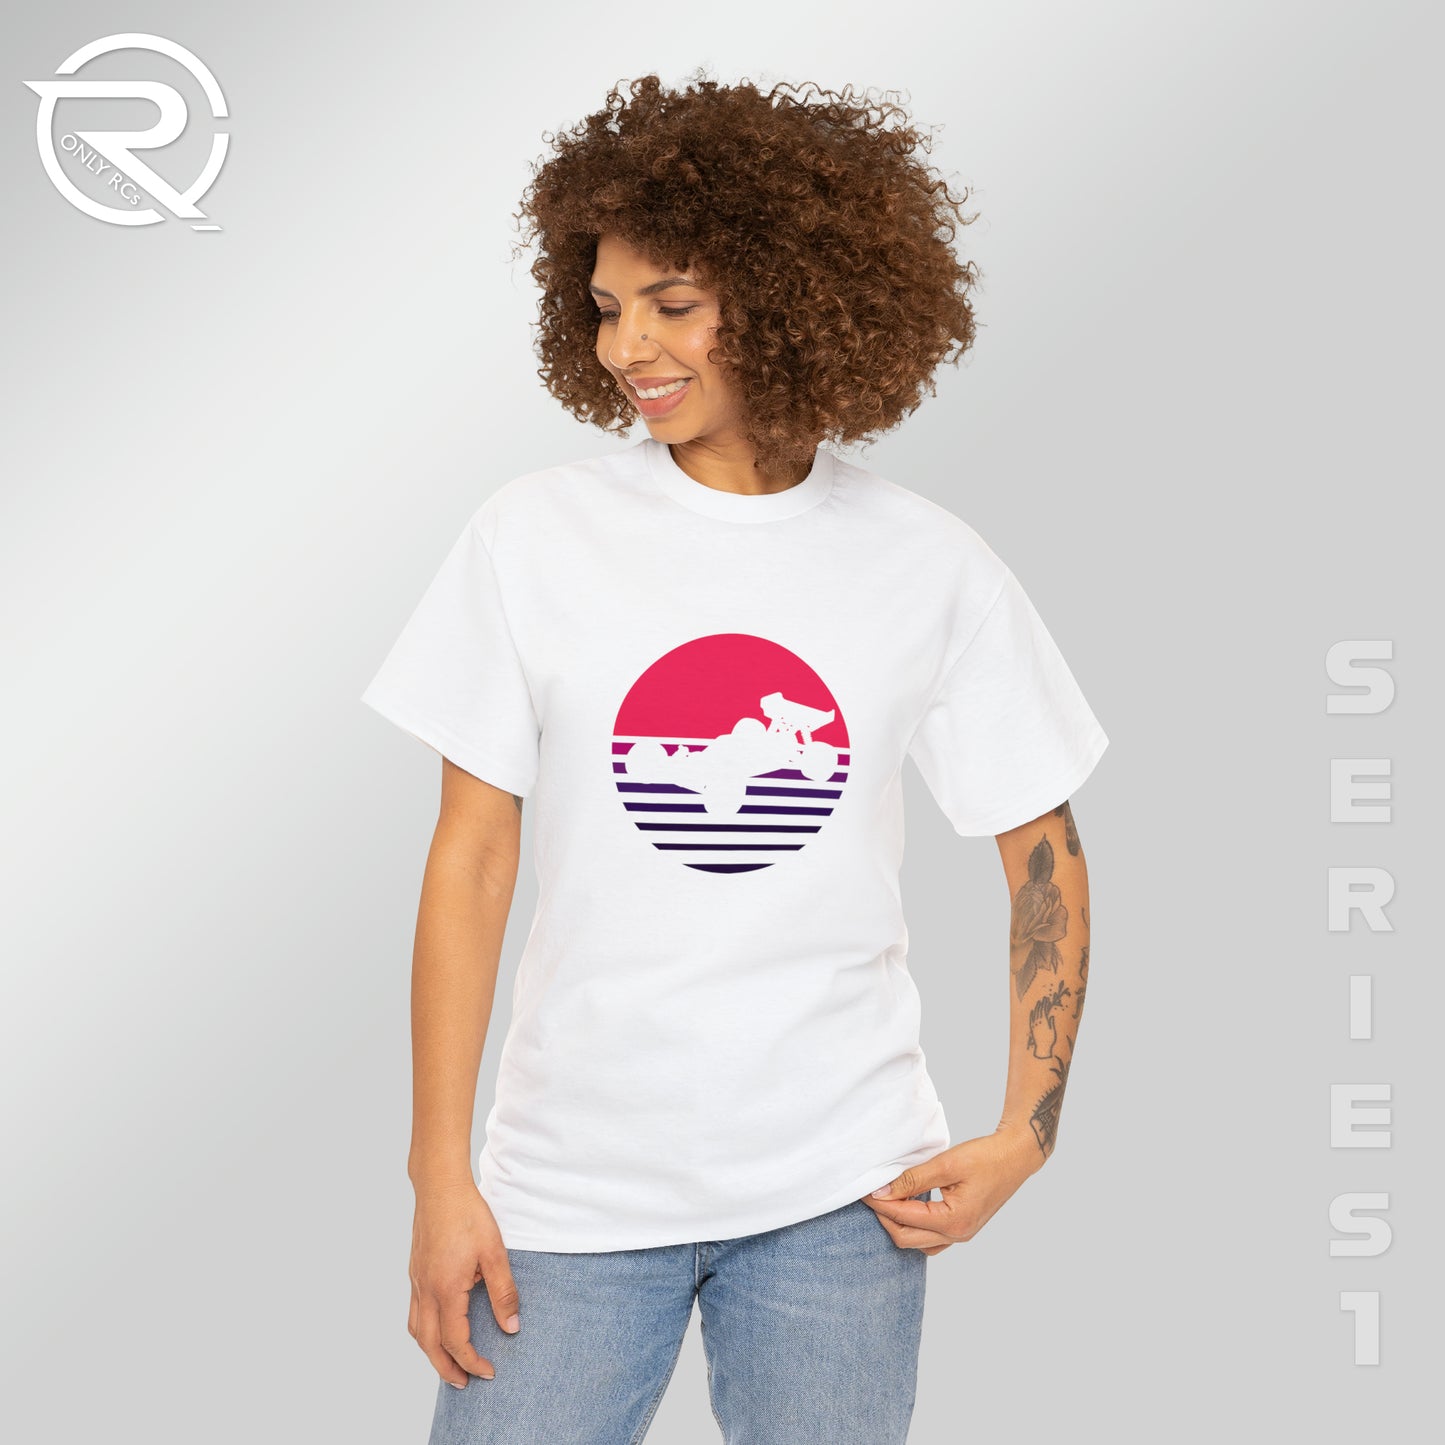 OnlyRCs - Sunset Fade Buggy Pink to Purple Silhouette Unisex Heavy Cotton Tee - Series 1